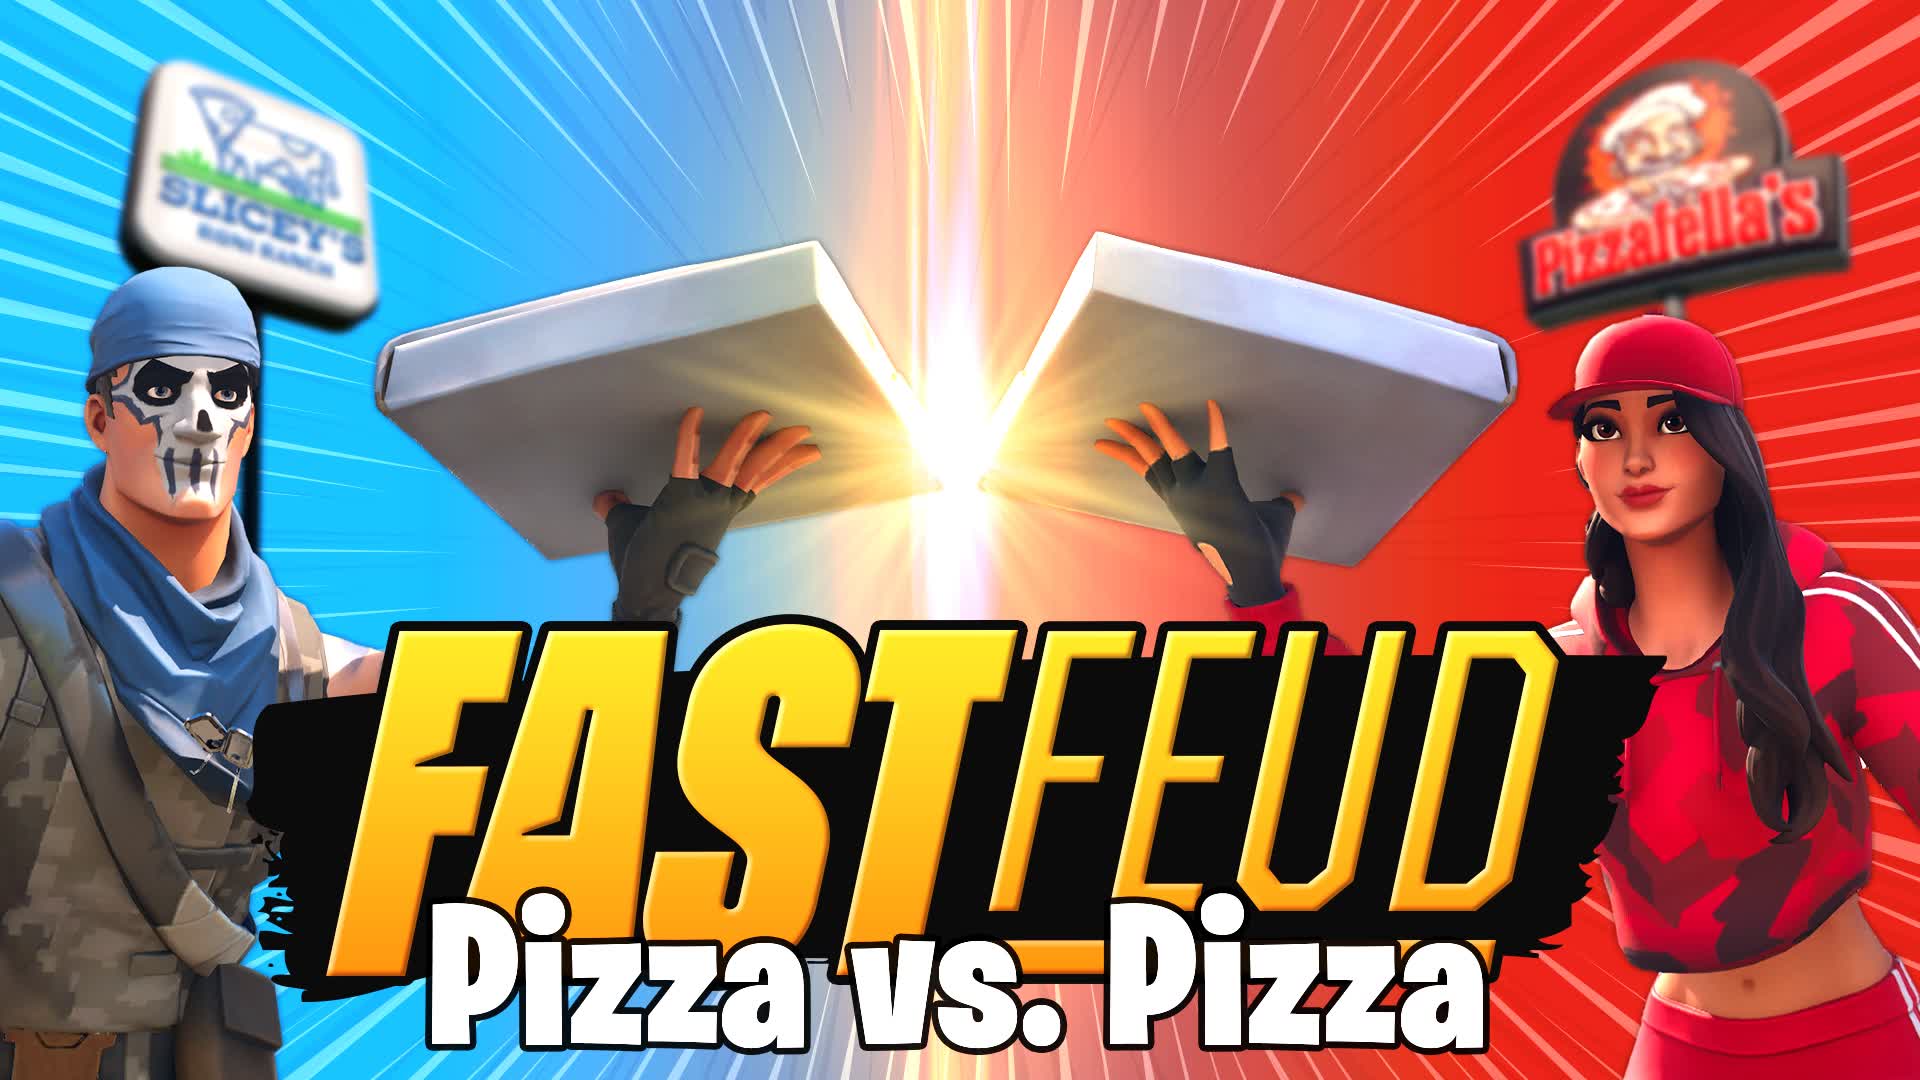 A promo image for Fast Feud, Pizza vs. Pizza. Two Fortnite characters wield pizza boxes in front of red and blue backgrounds.